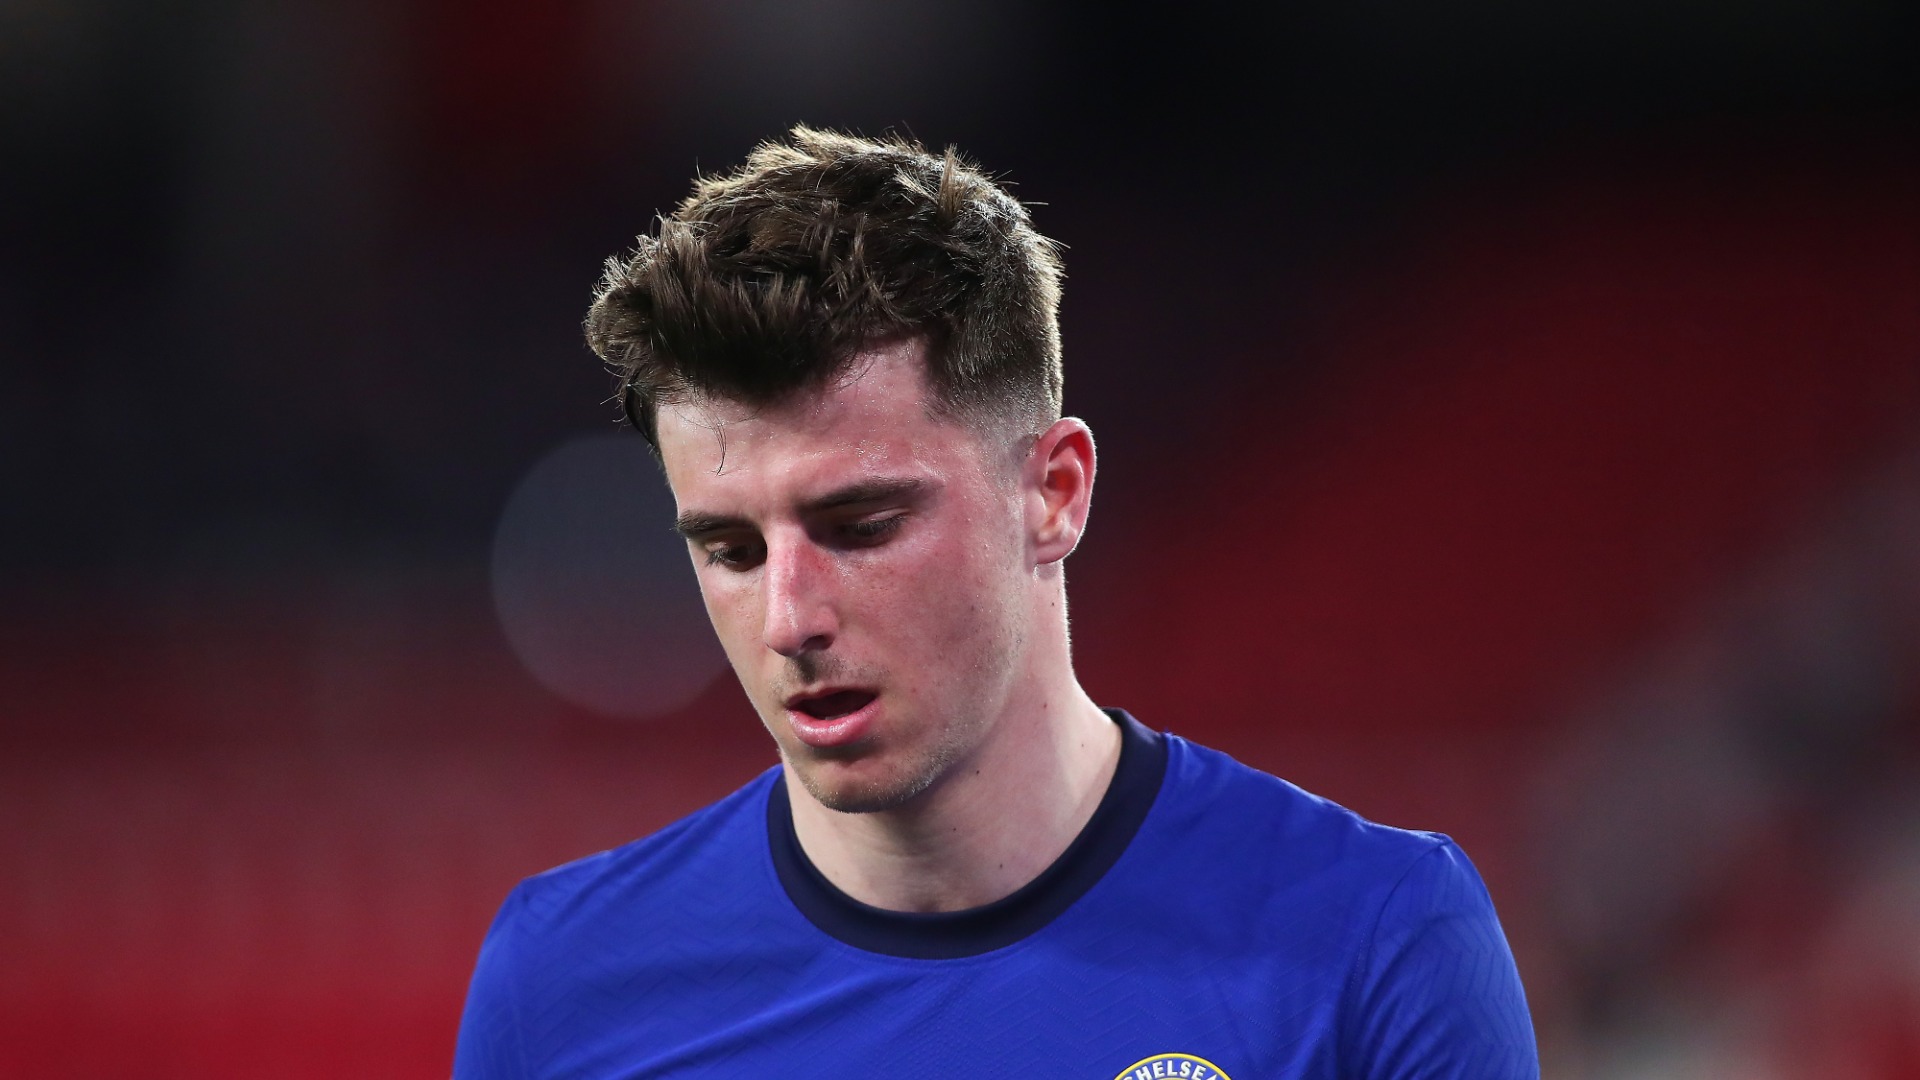 Ahead of Chelsea's FA Cup semi-final with Manchester City, we look at how Mason Mount has kicked on under Thomas Tuchel.